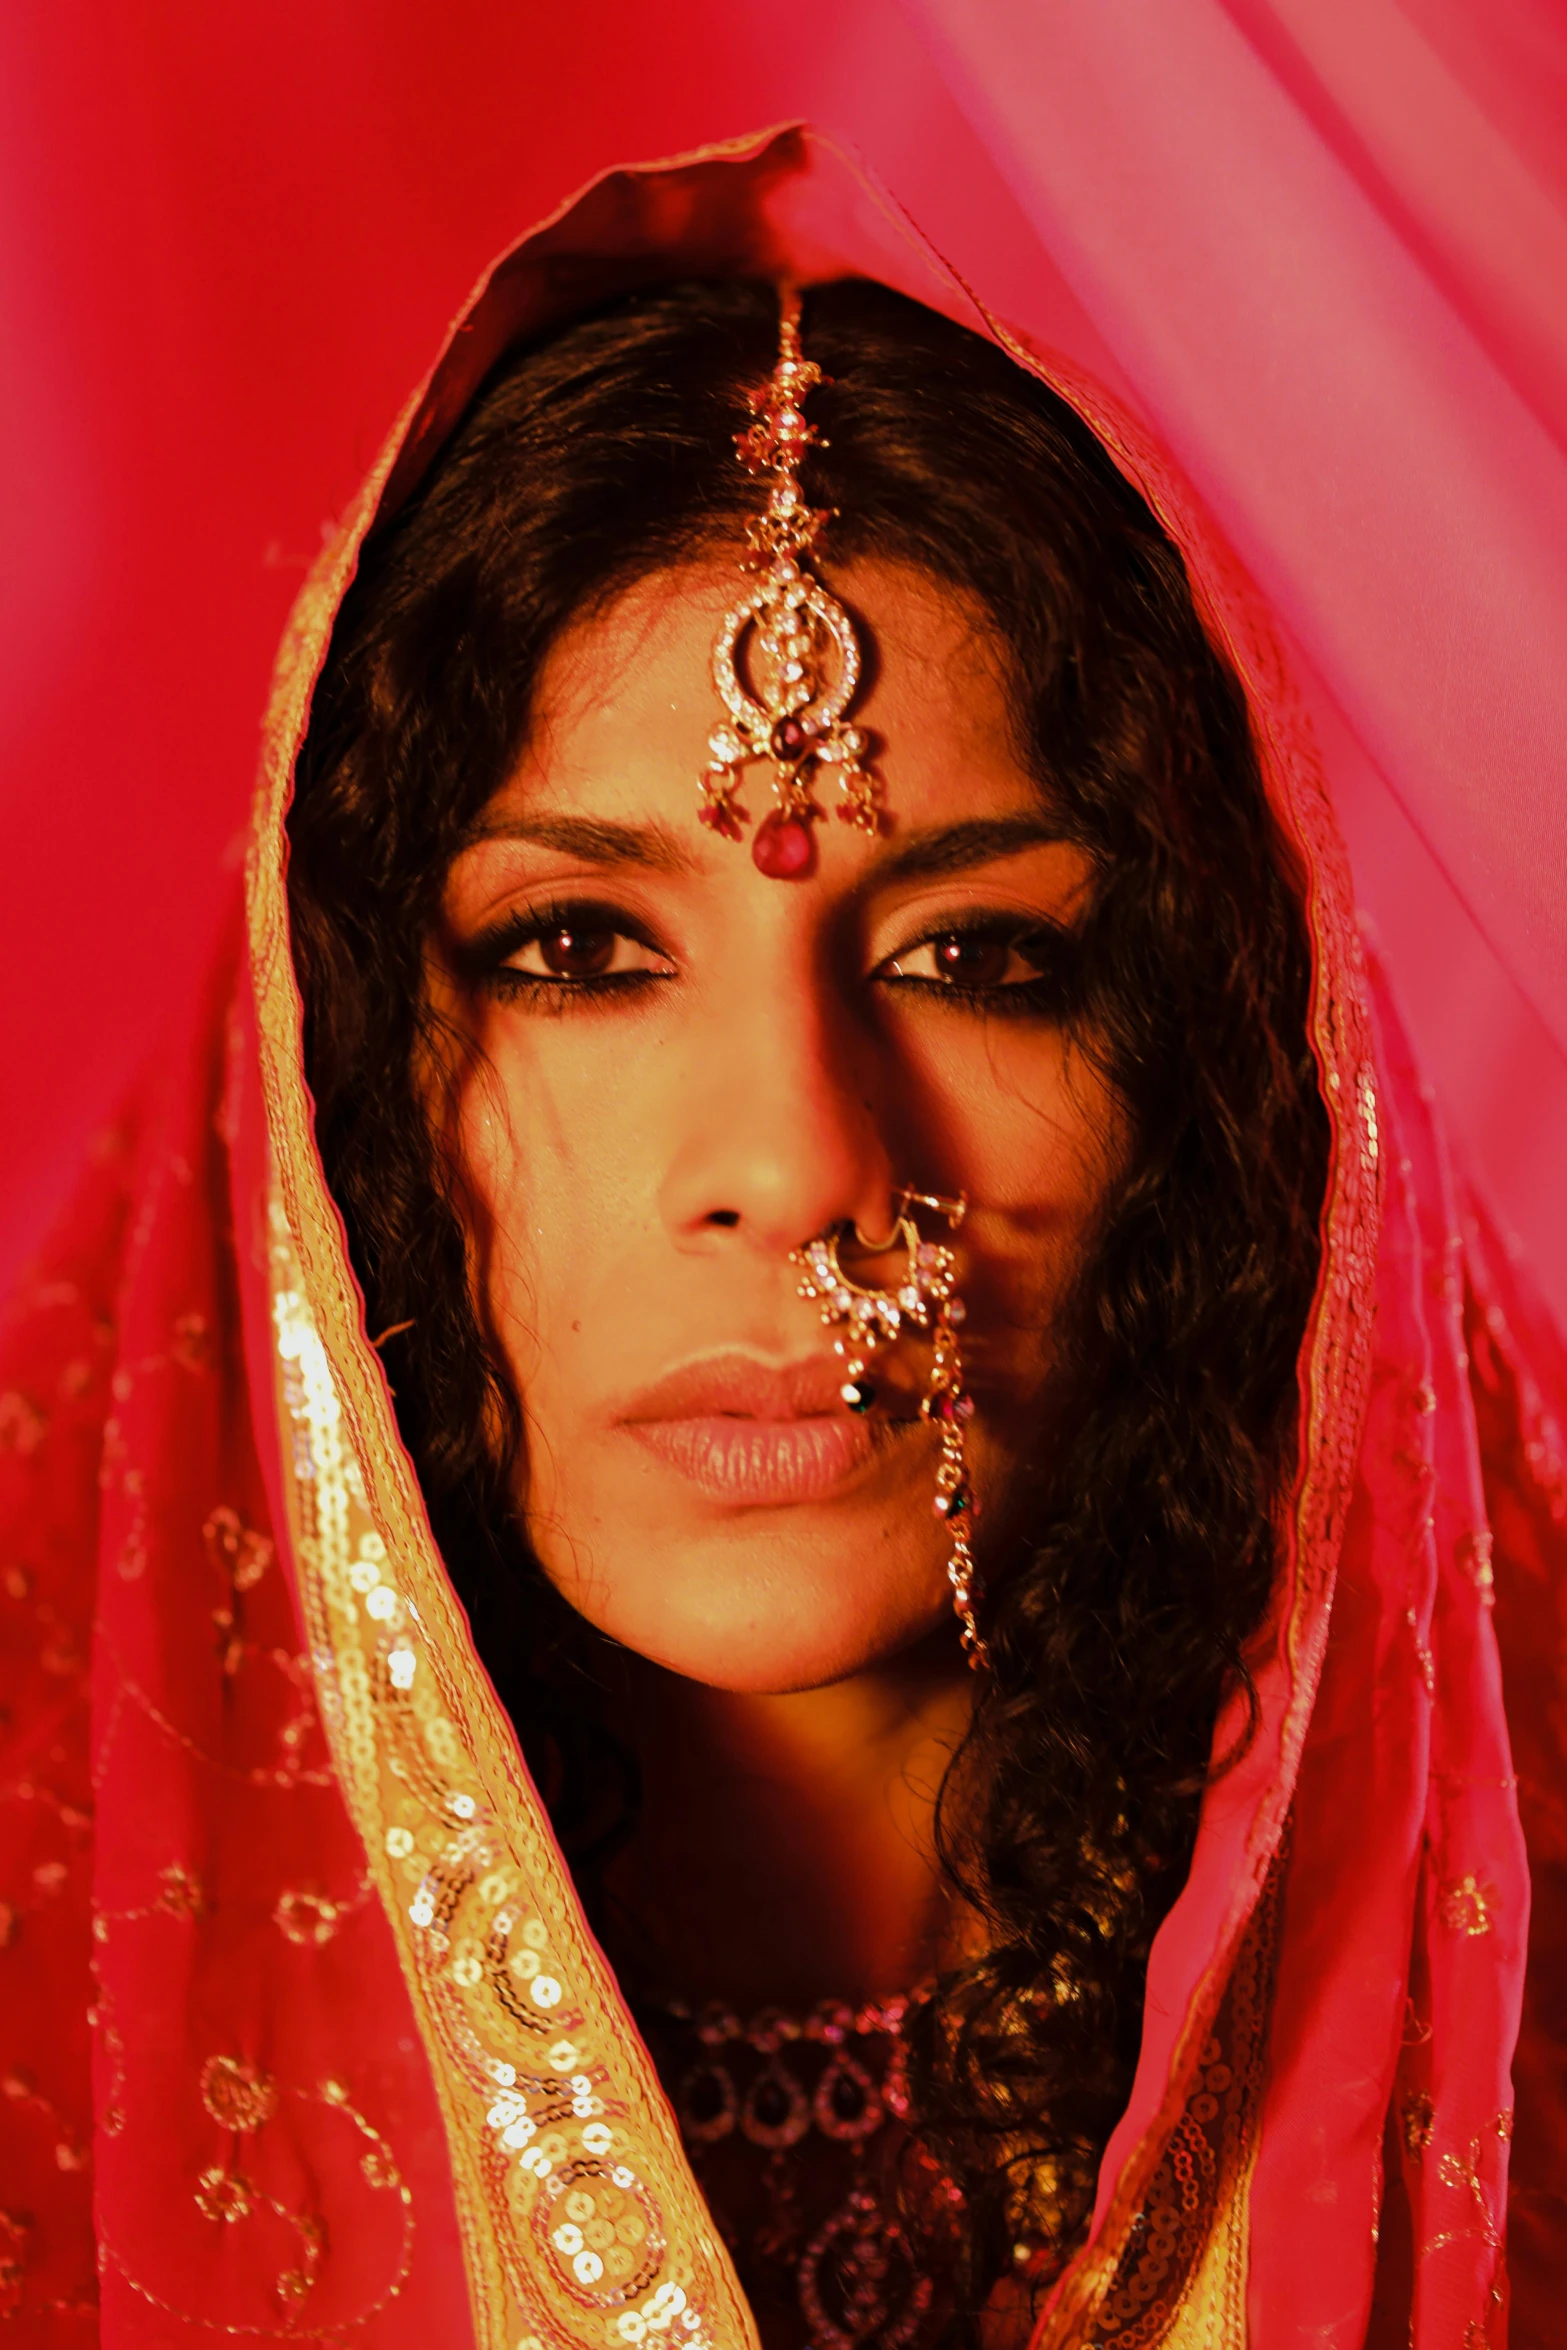 a close up of a woman wearing a veil, an album cover, inspired by Osman Hamdi Bey, dada, freida pinto, with red haze, movie still, wearing ornate clothing